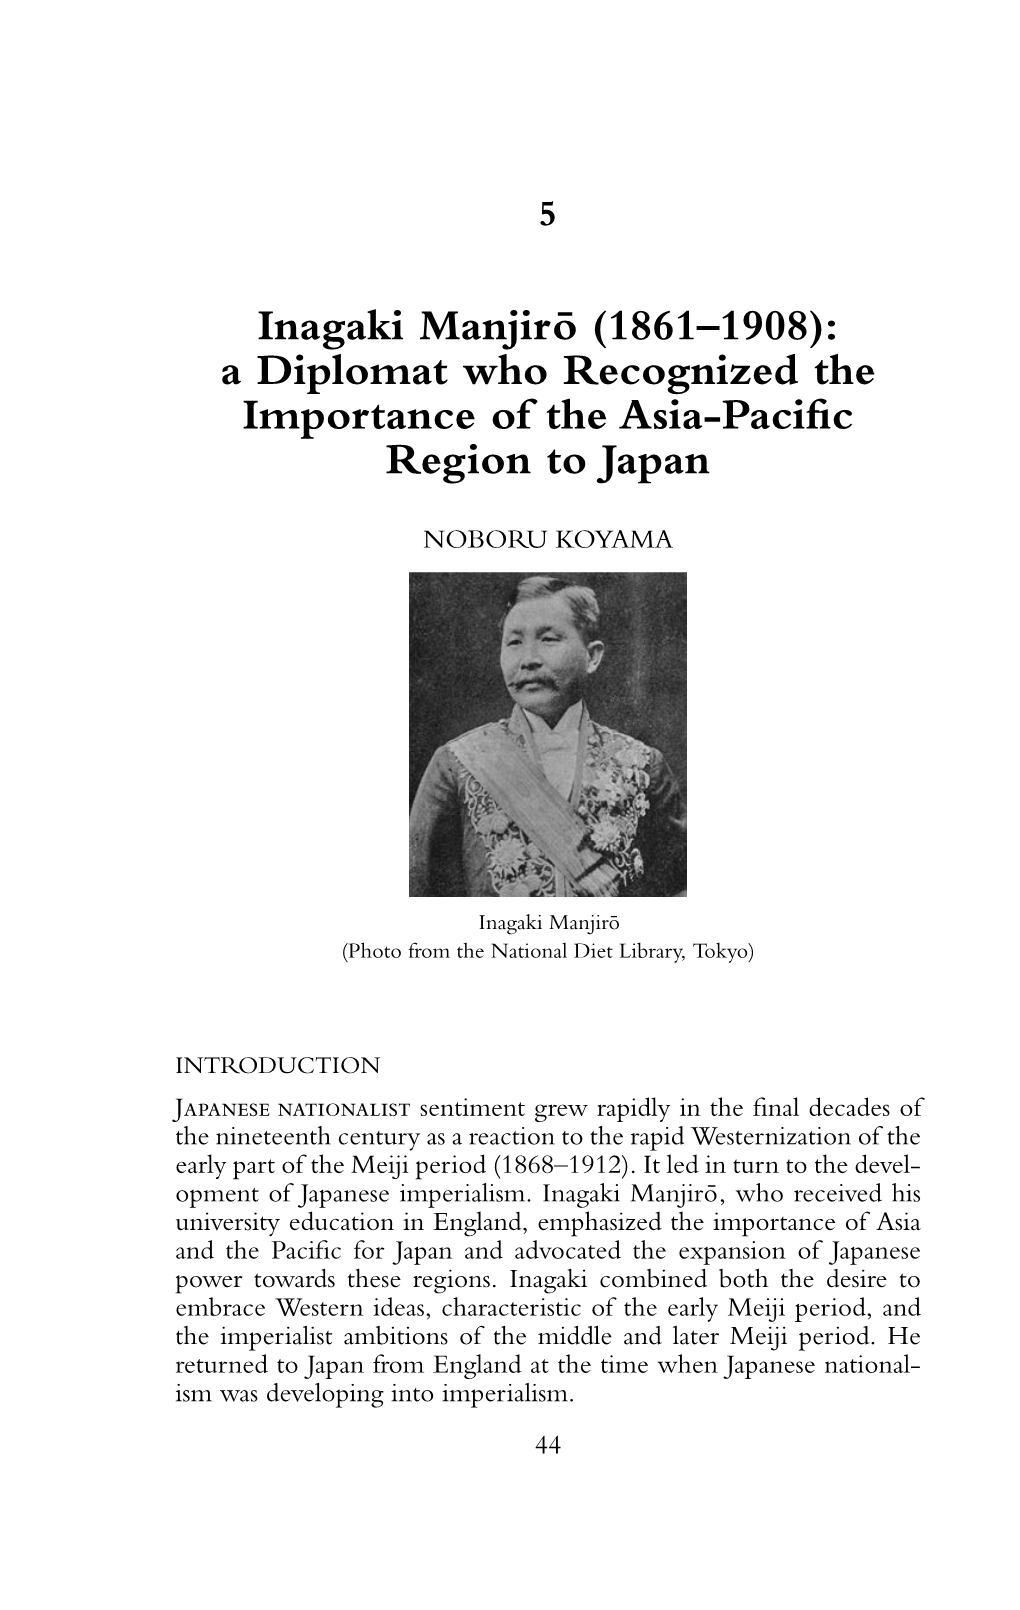 Inagaki Manjiro¯ (1861–1908): a Diplomat Who Recognized the Importance of the Asia-Paciﬁc Region to Japan